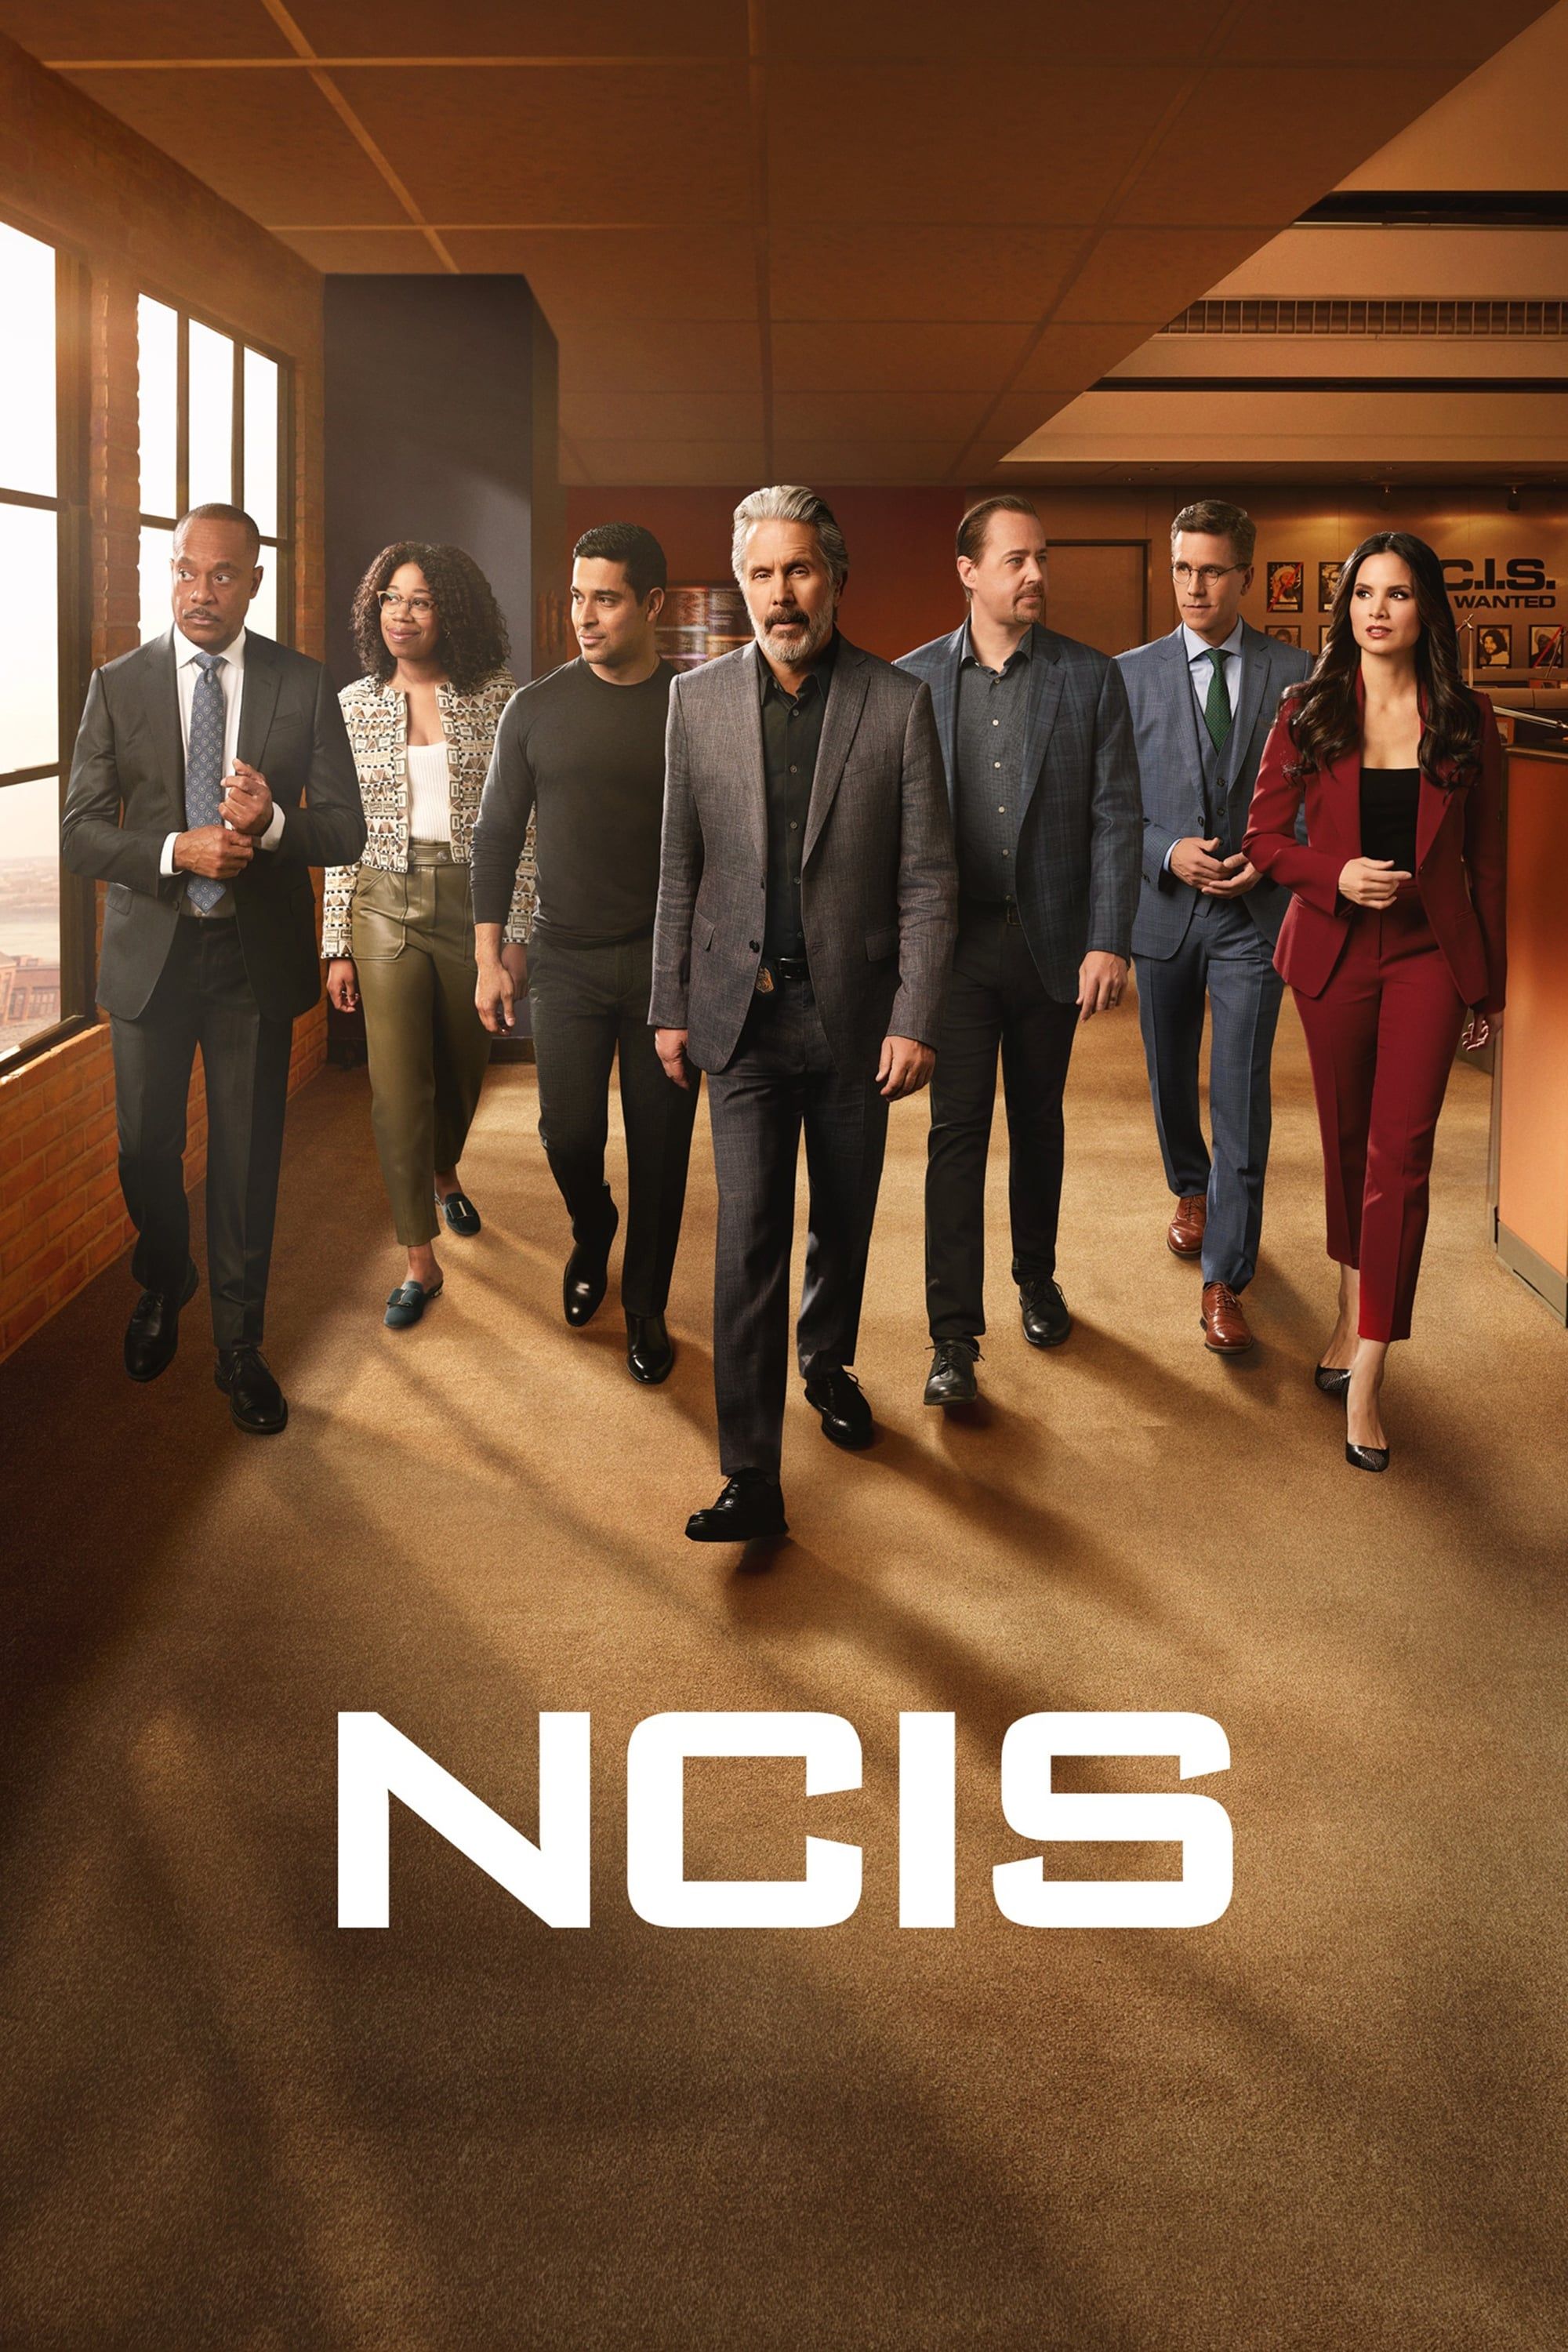 ncis season 21 finale review: knight gets a big potential goodbye